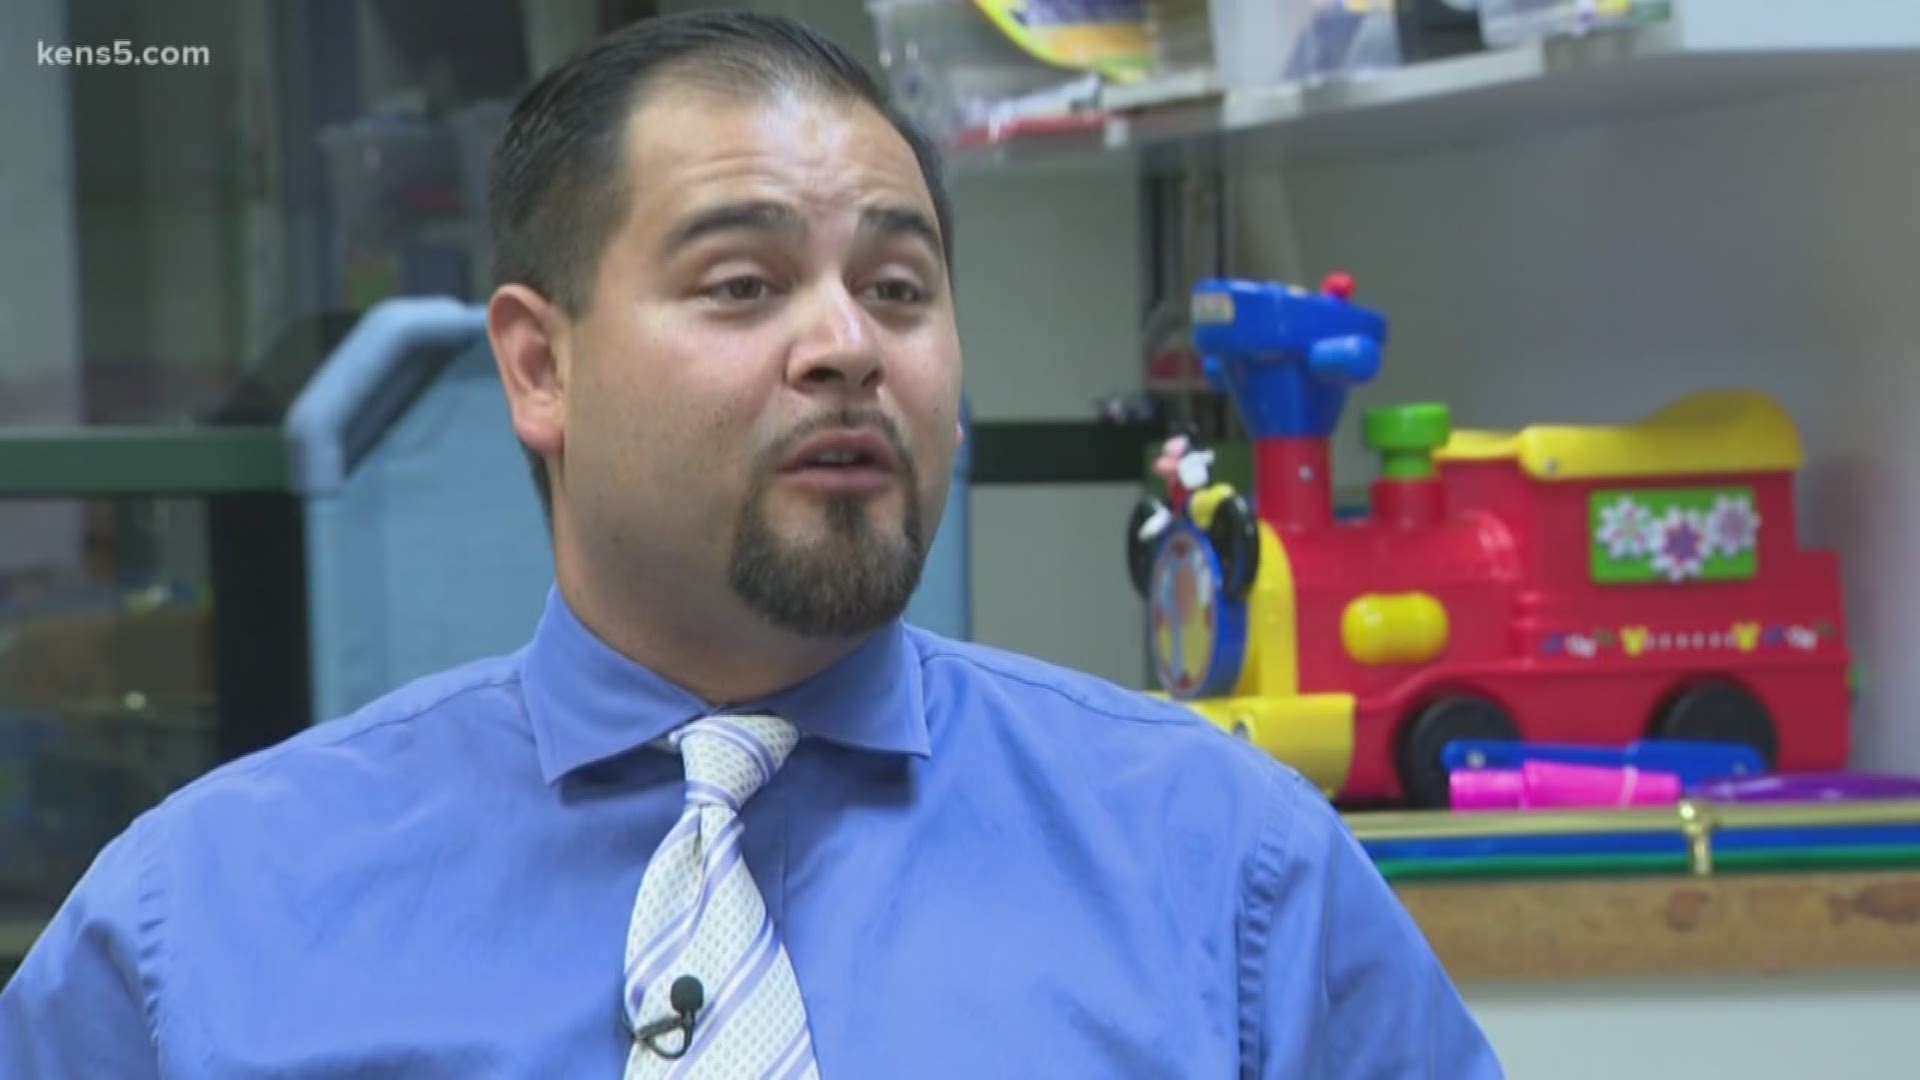 For this Father's Day installment of Forever Family, KENS 5's Vinnie Vinzetta talks with organizers of a local program that focuses on helping San Antonio fathers become nurturing parents.